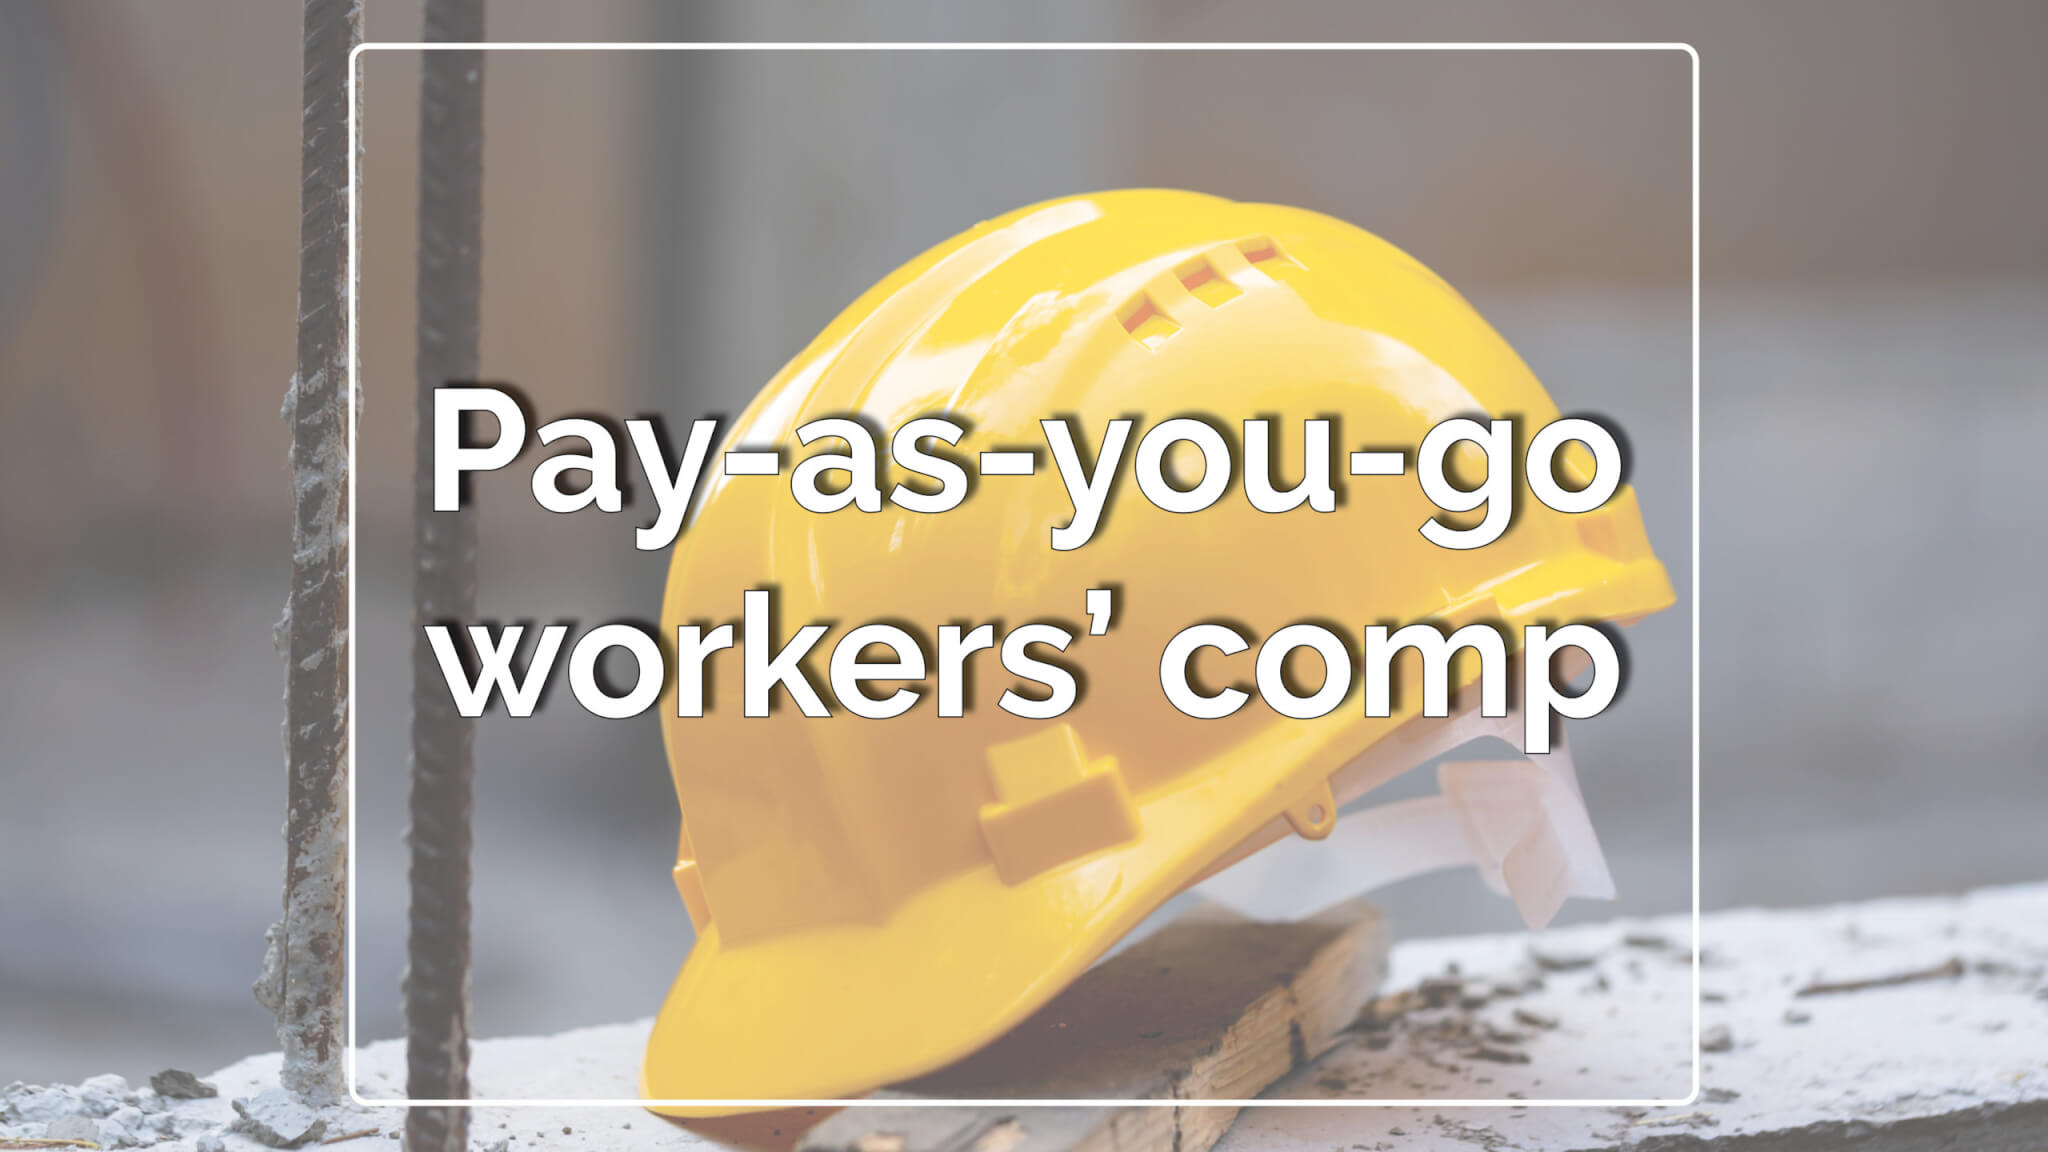 pay-as-you-go workers' comp